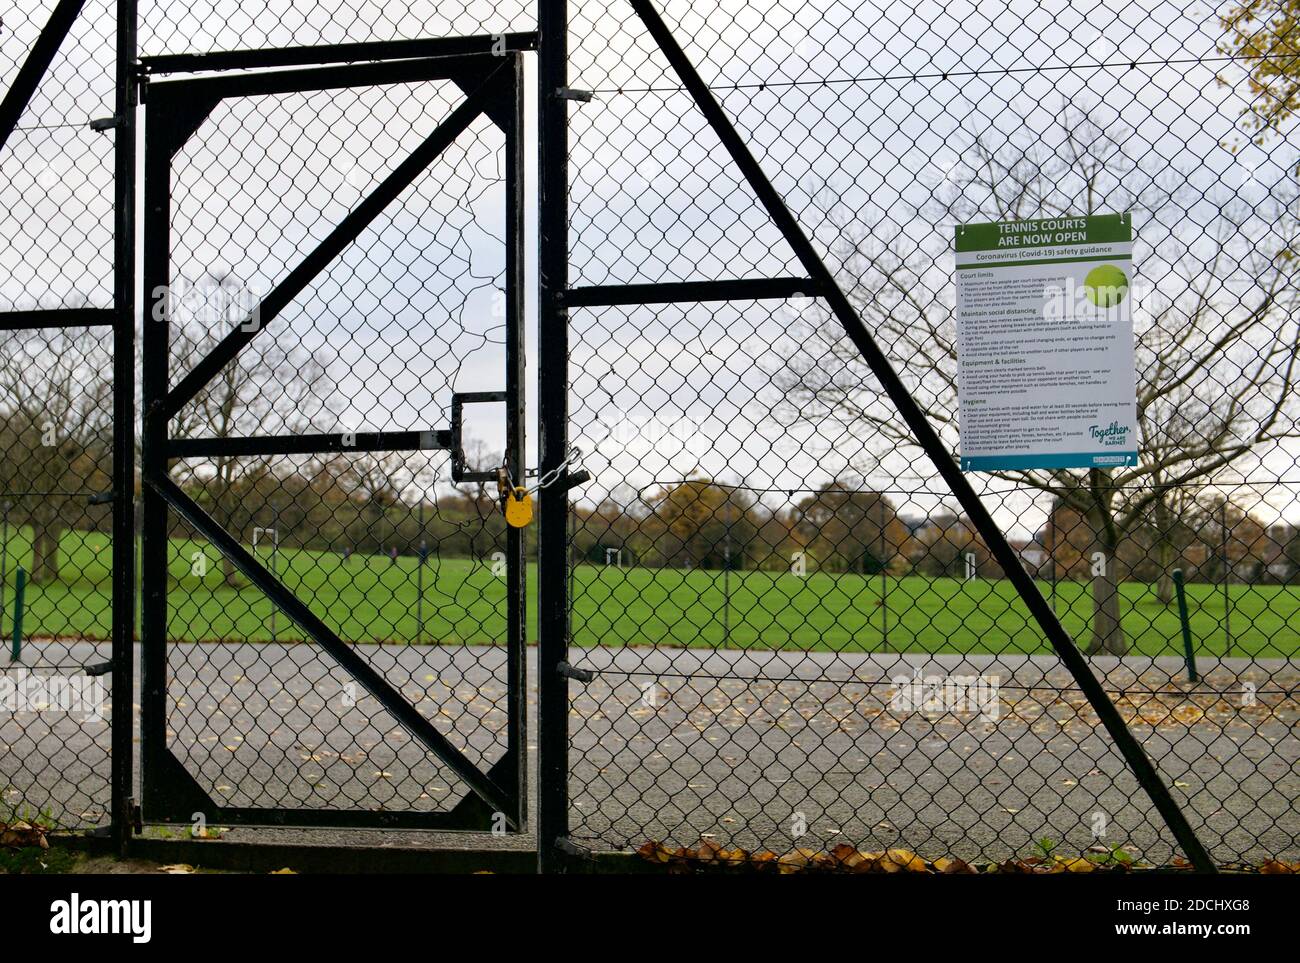 Tennis court closed with padlock due to covid19 regulations during England's second national coronavirus lockdown. Sunny Hill Park, Hendon, London. Stock Photo